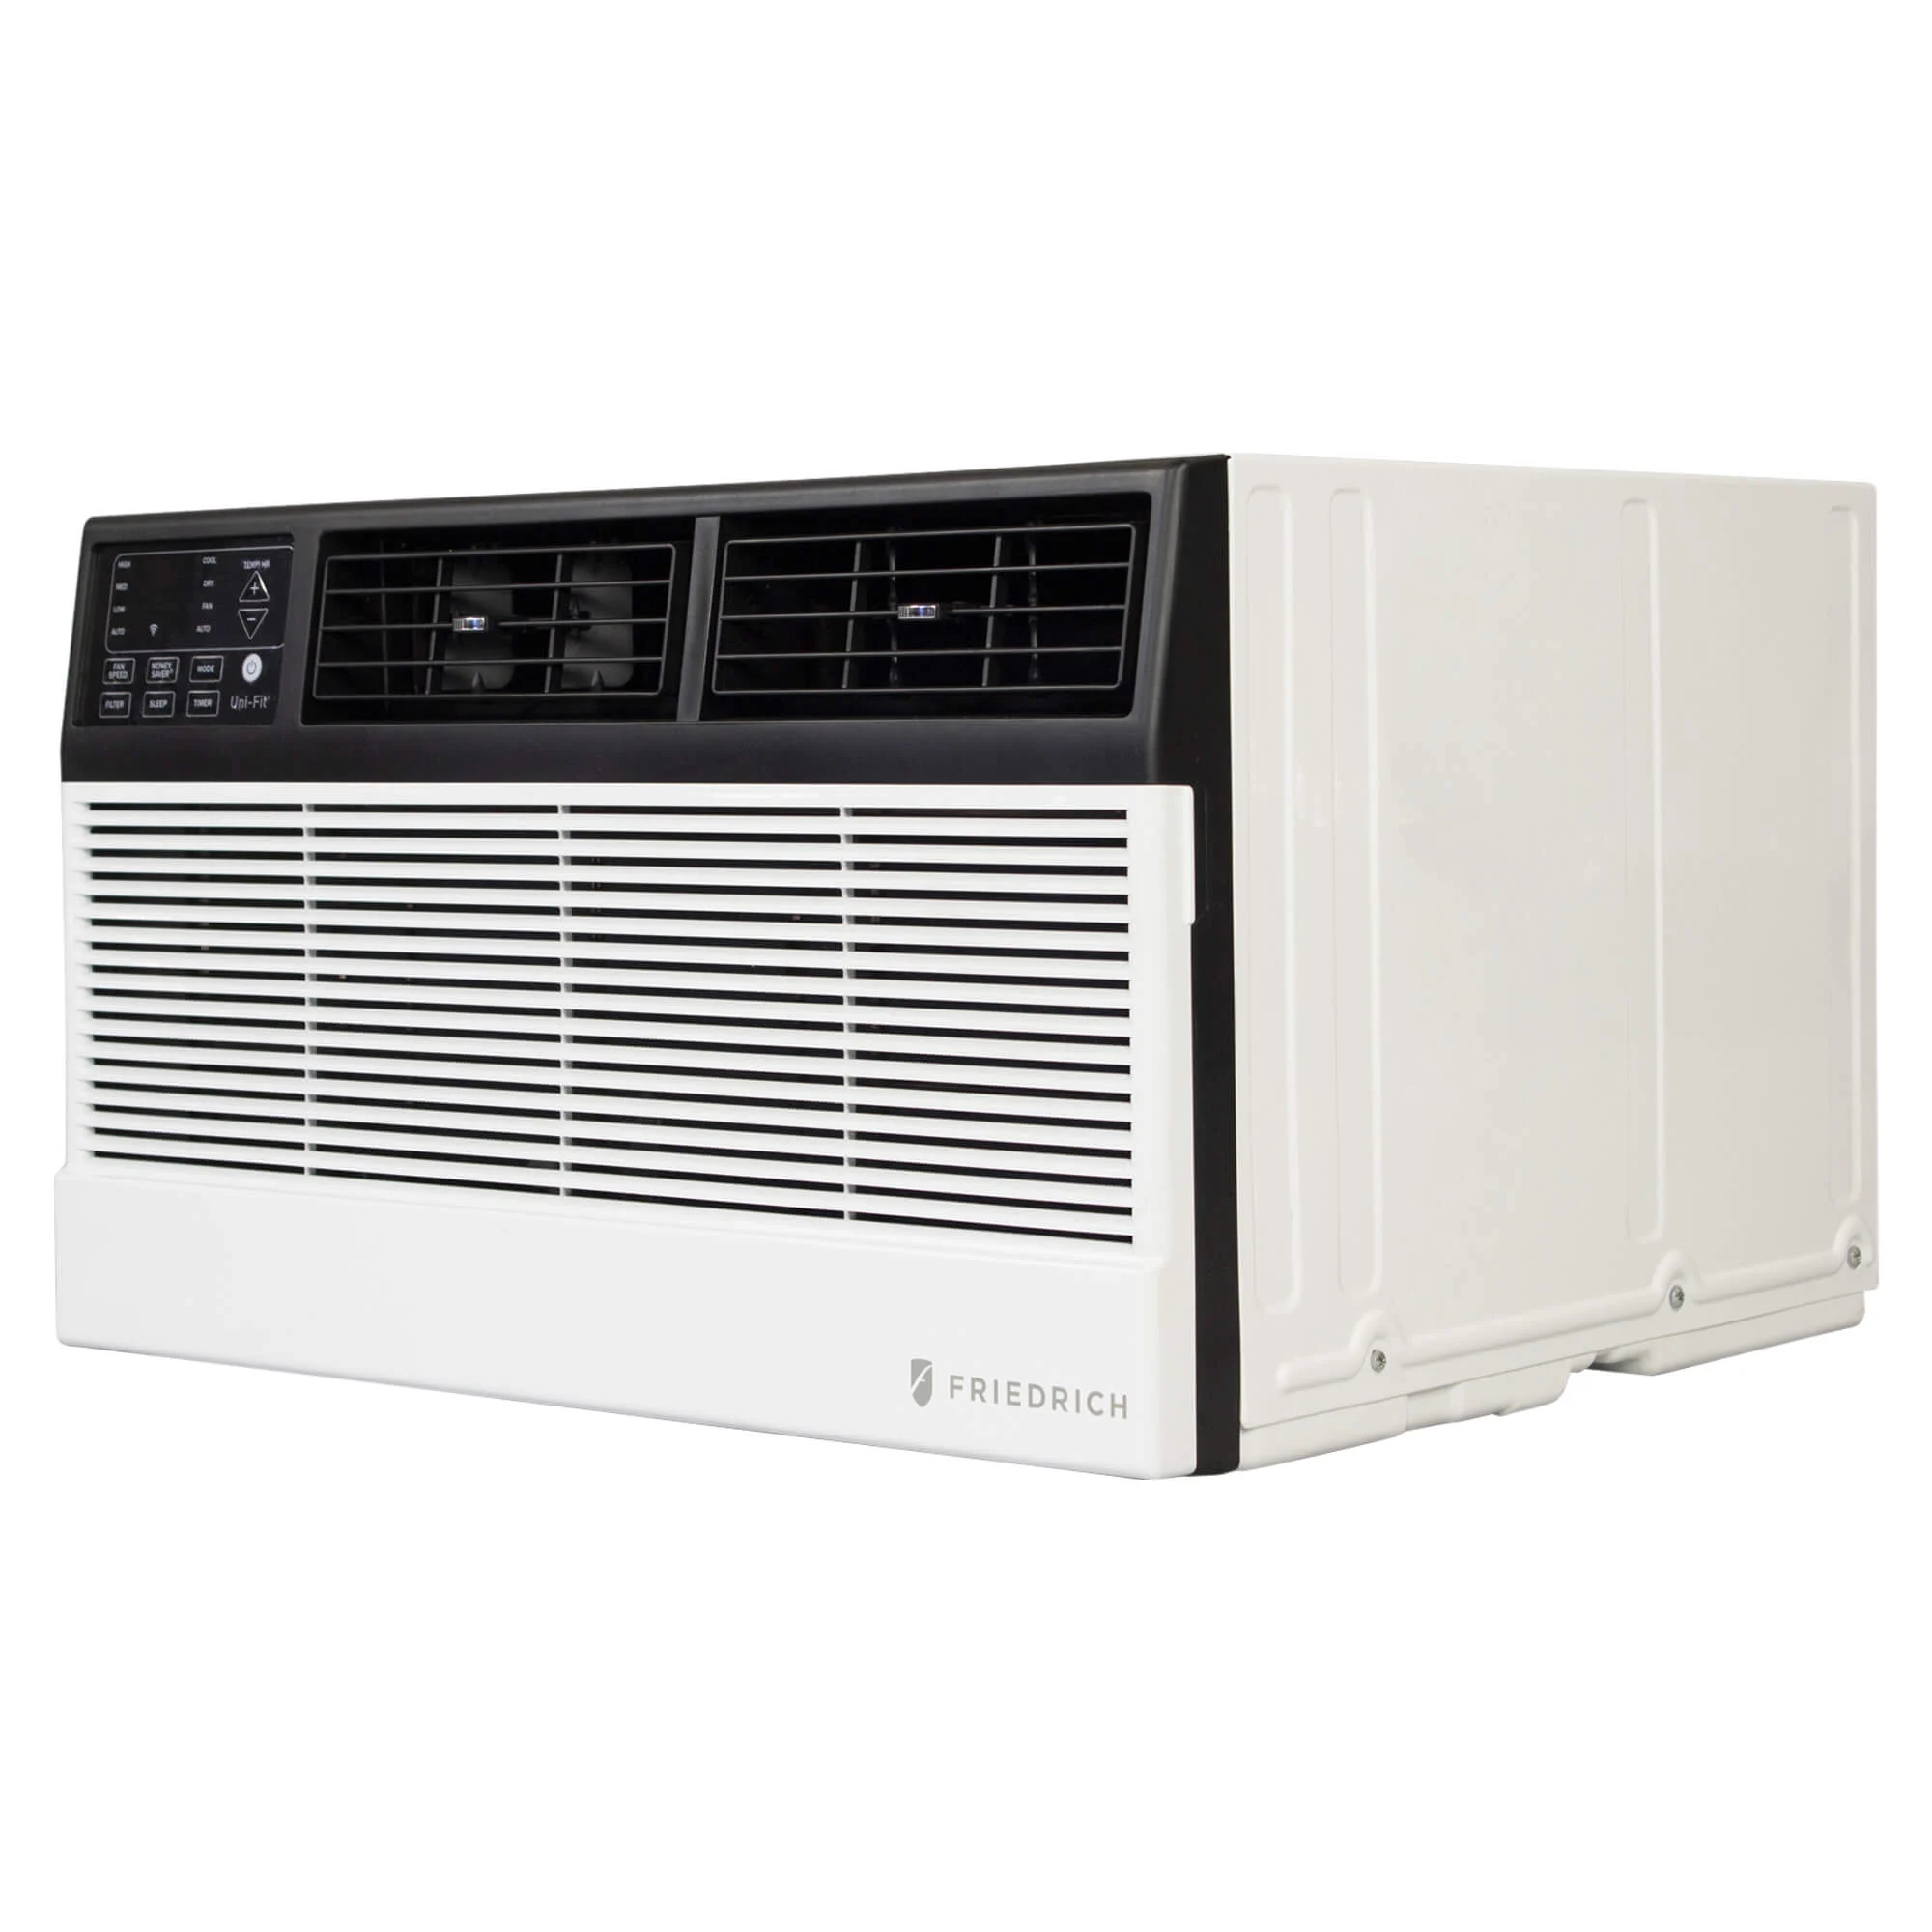 HEAT&COOLING MODEL INVERTER (REVERSE CYCLE) ROOM AIR CONDITIONER WALL MOUNTED TYPE